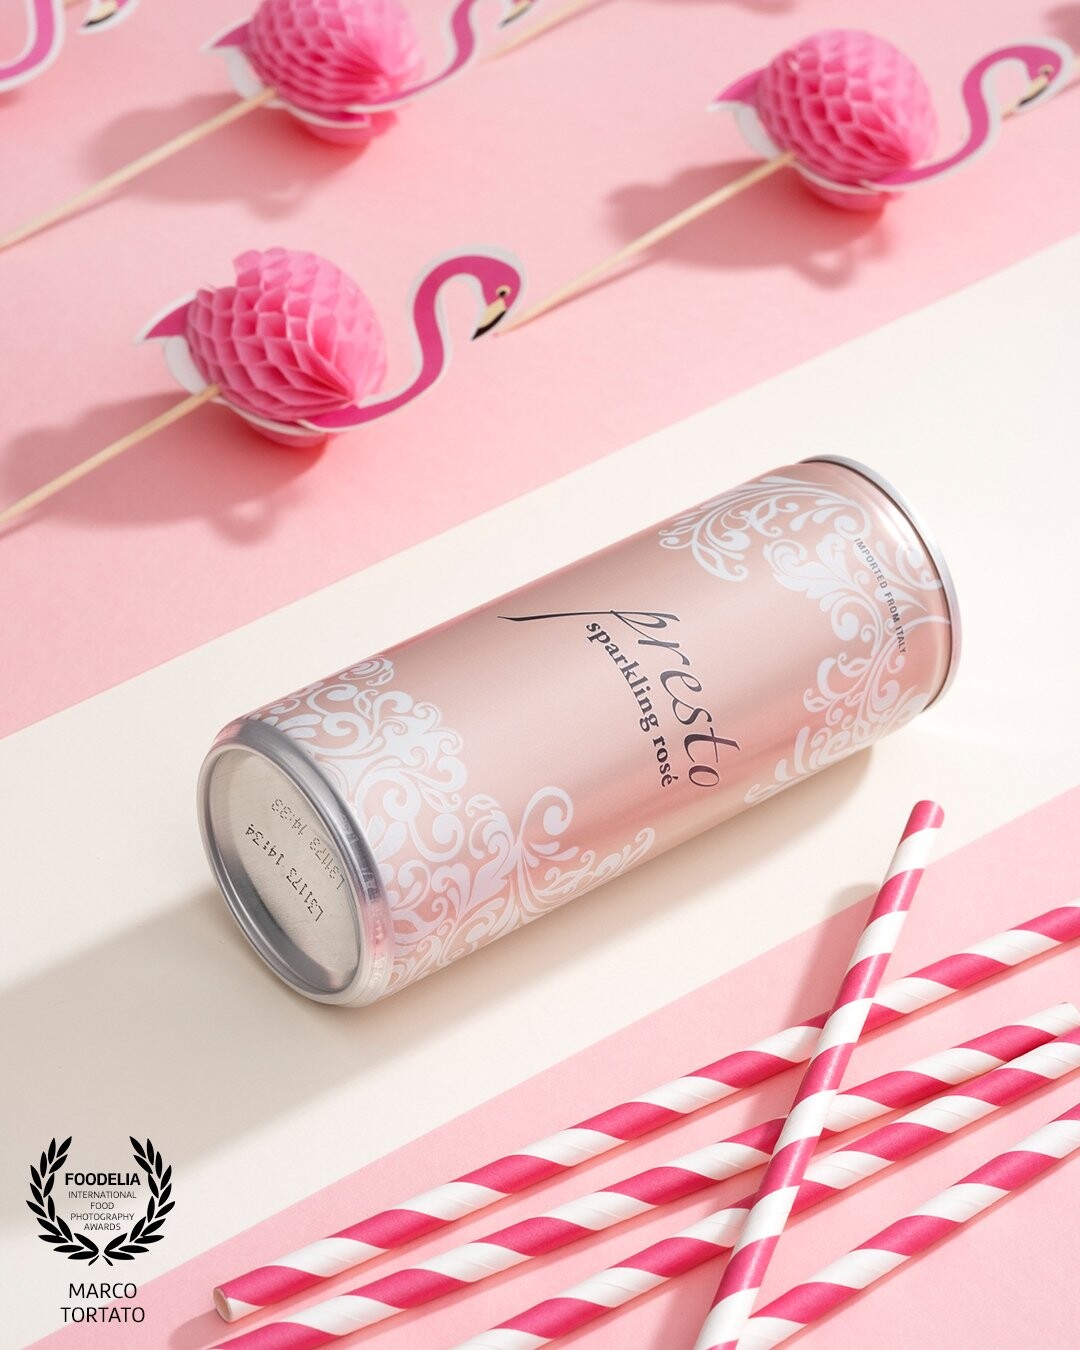 Presto Sparkling Rosé - Summer Edition <br />
Photoshoot for the US market of this sparkling wine in a can. <br />
Pink is the keyword. <br />
<br />
www.marcotortato.it<br />
@yorick_food_and_wine